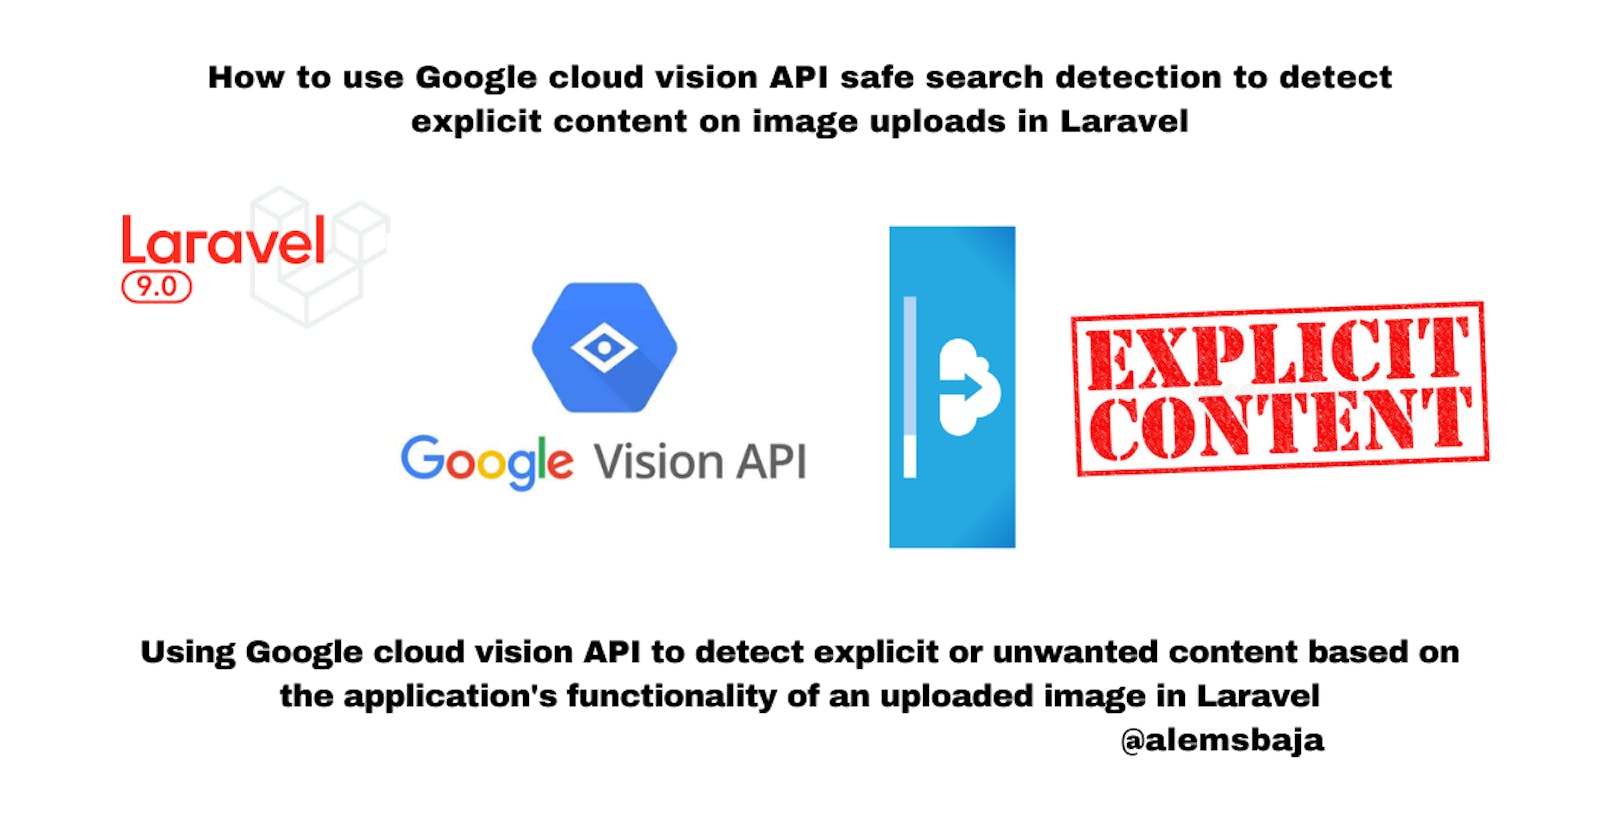 How to use Google cloud vision API safe search detection to detect explicit content on image uploads in Laravel